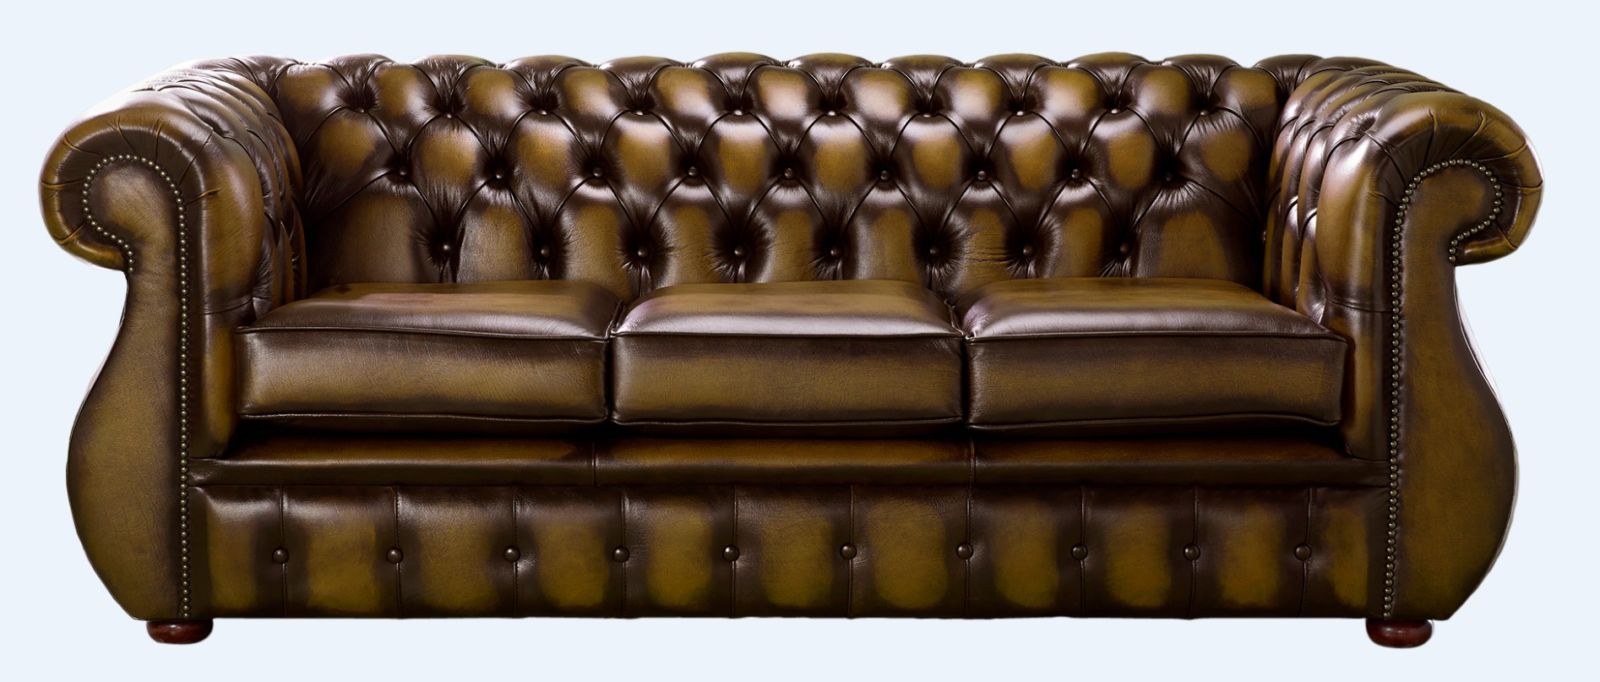 Product photograph of Chesterfield 3 Seater Antique Gold Leather Sofa Bespoke In Kimberley Style from Chesterfield Sofas